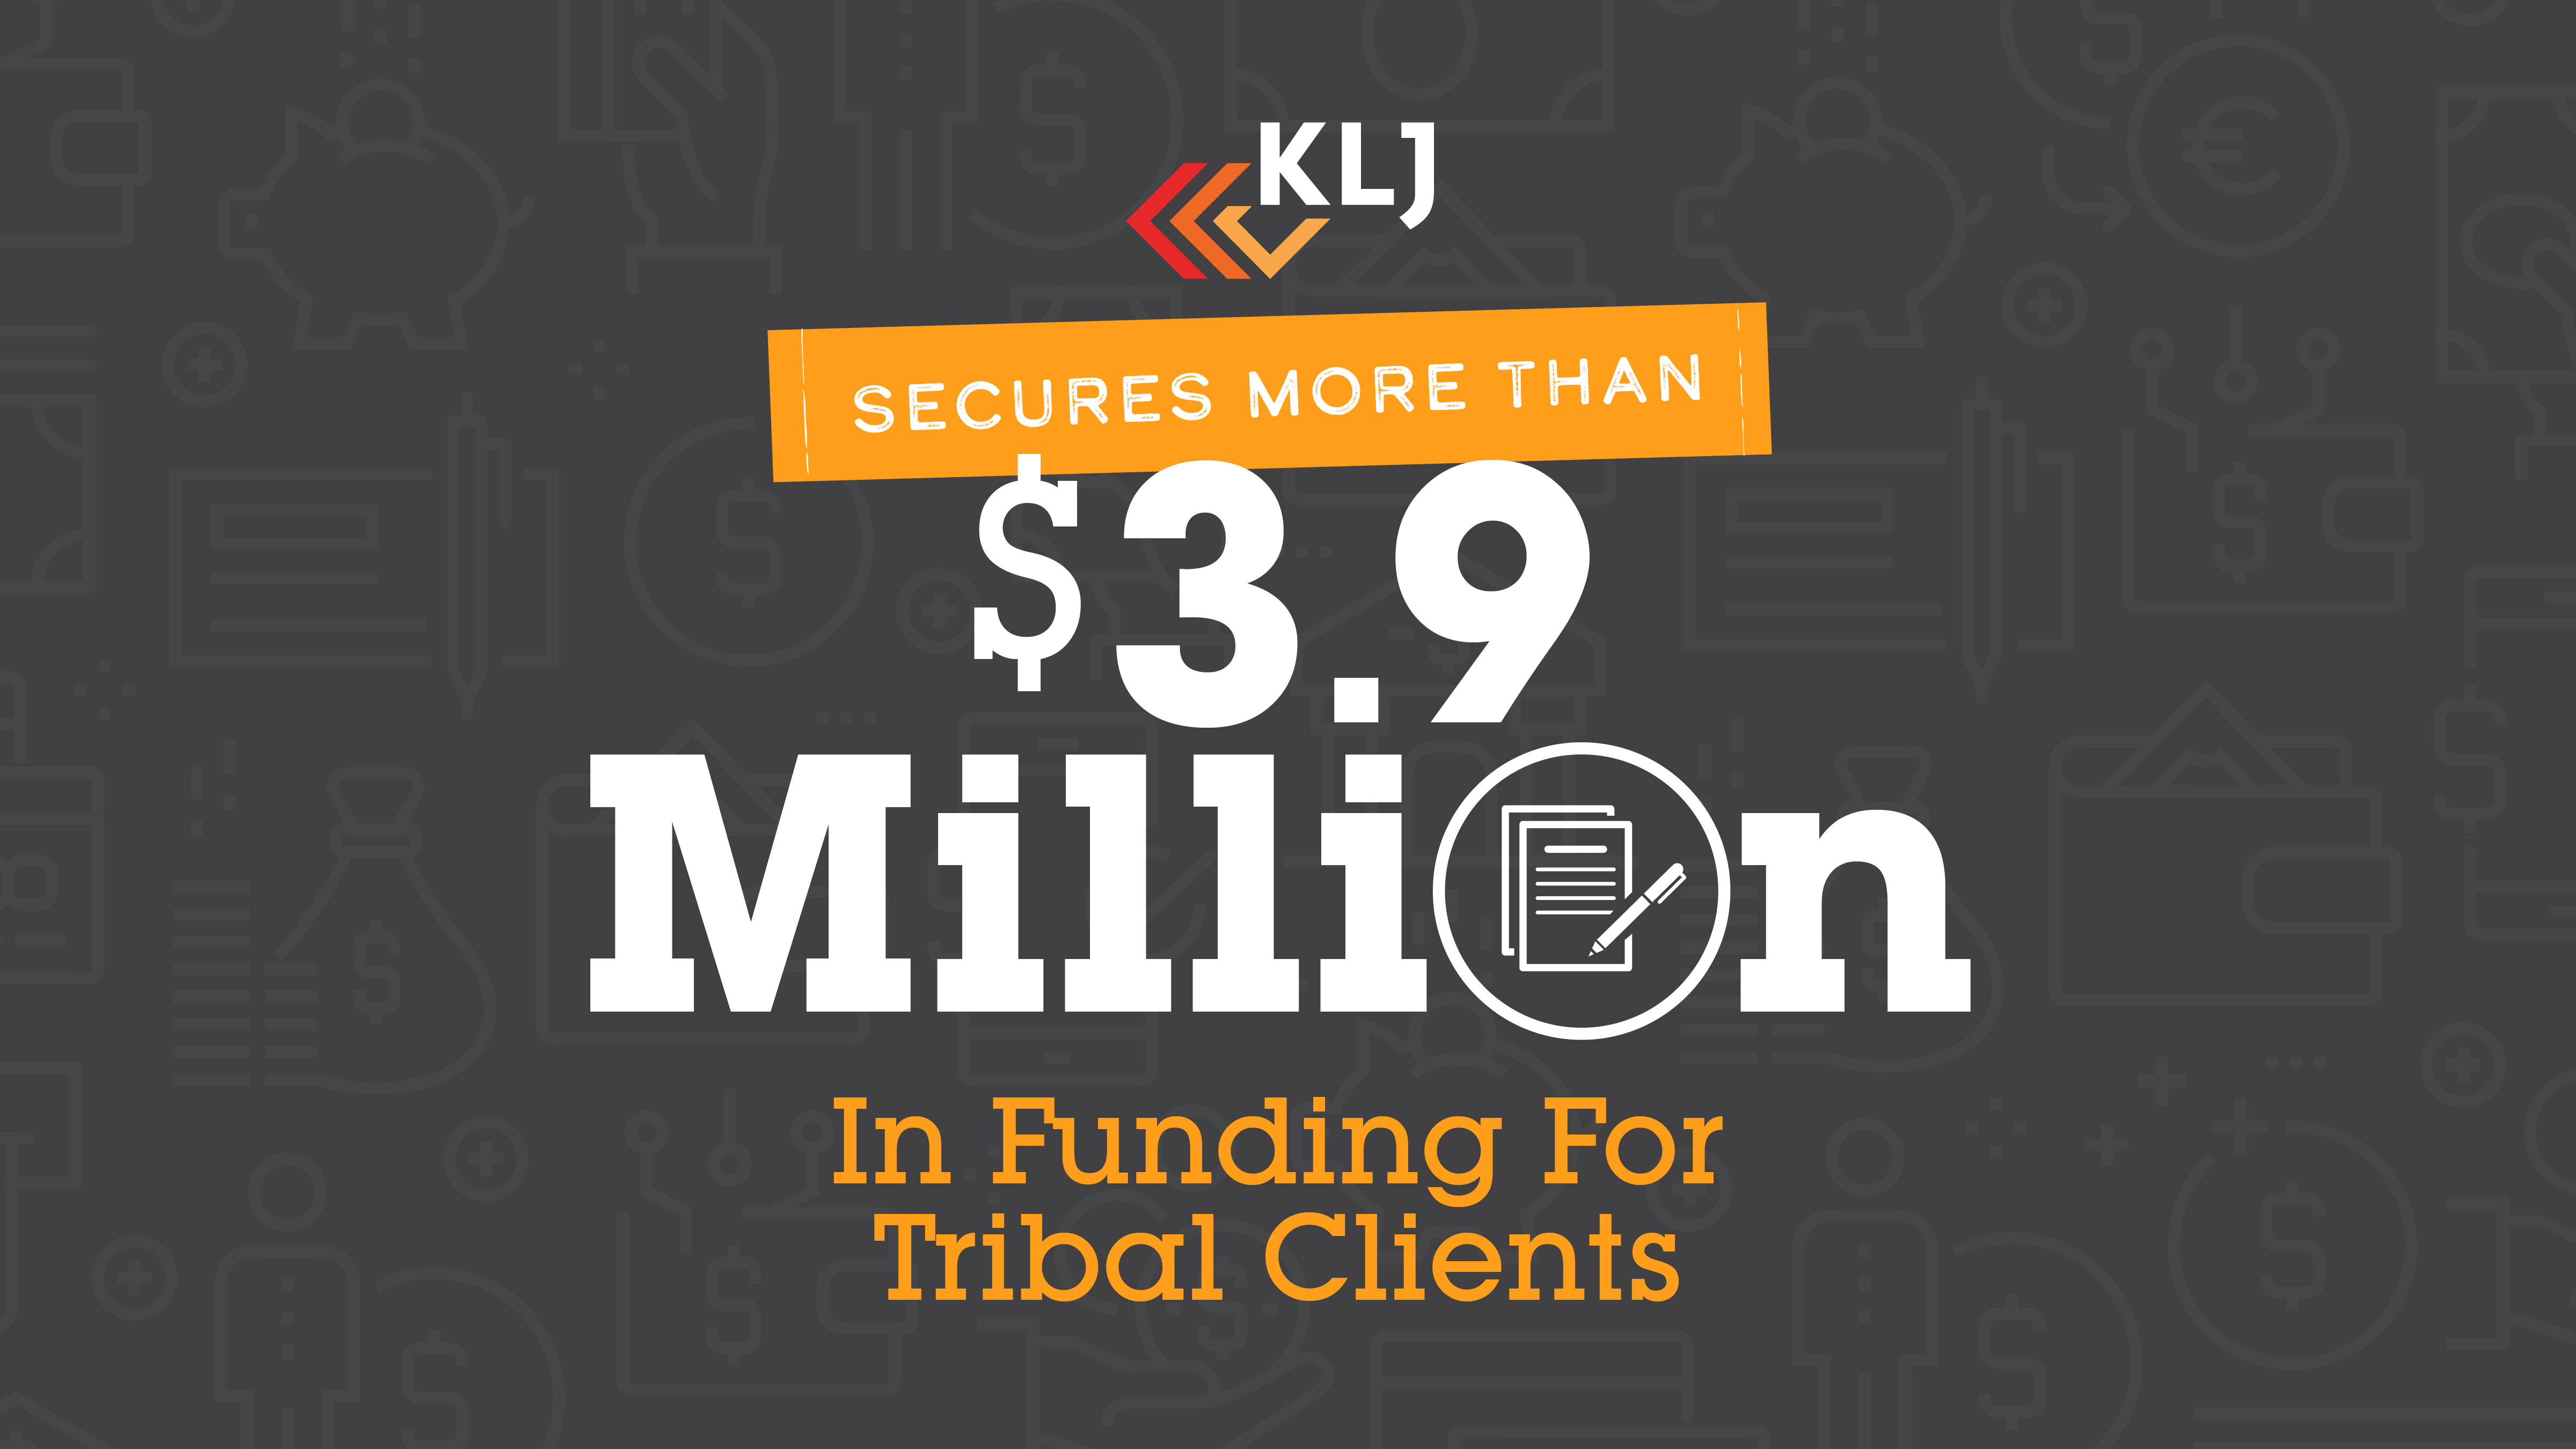 KLJ Secures More Than $3.9 Million in Funding for Tribal Clients